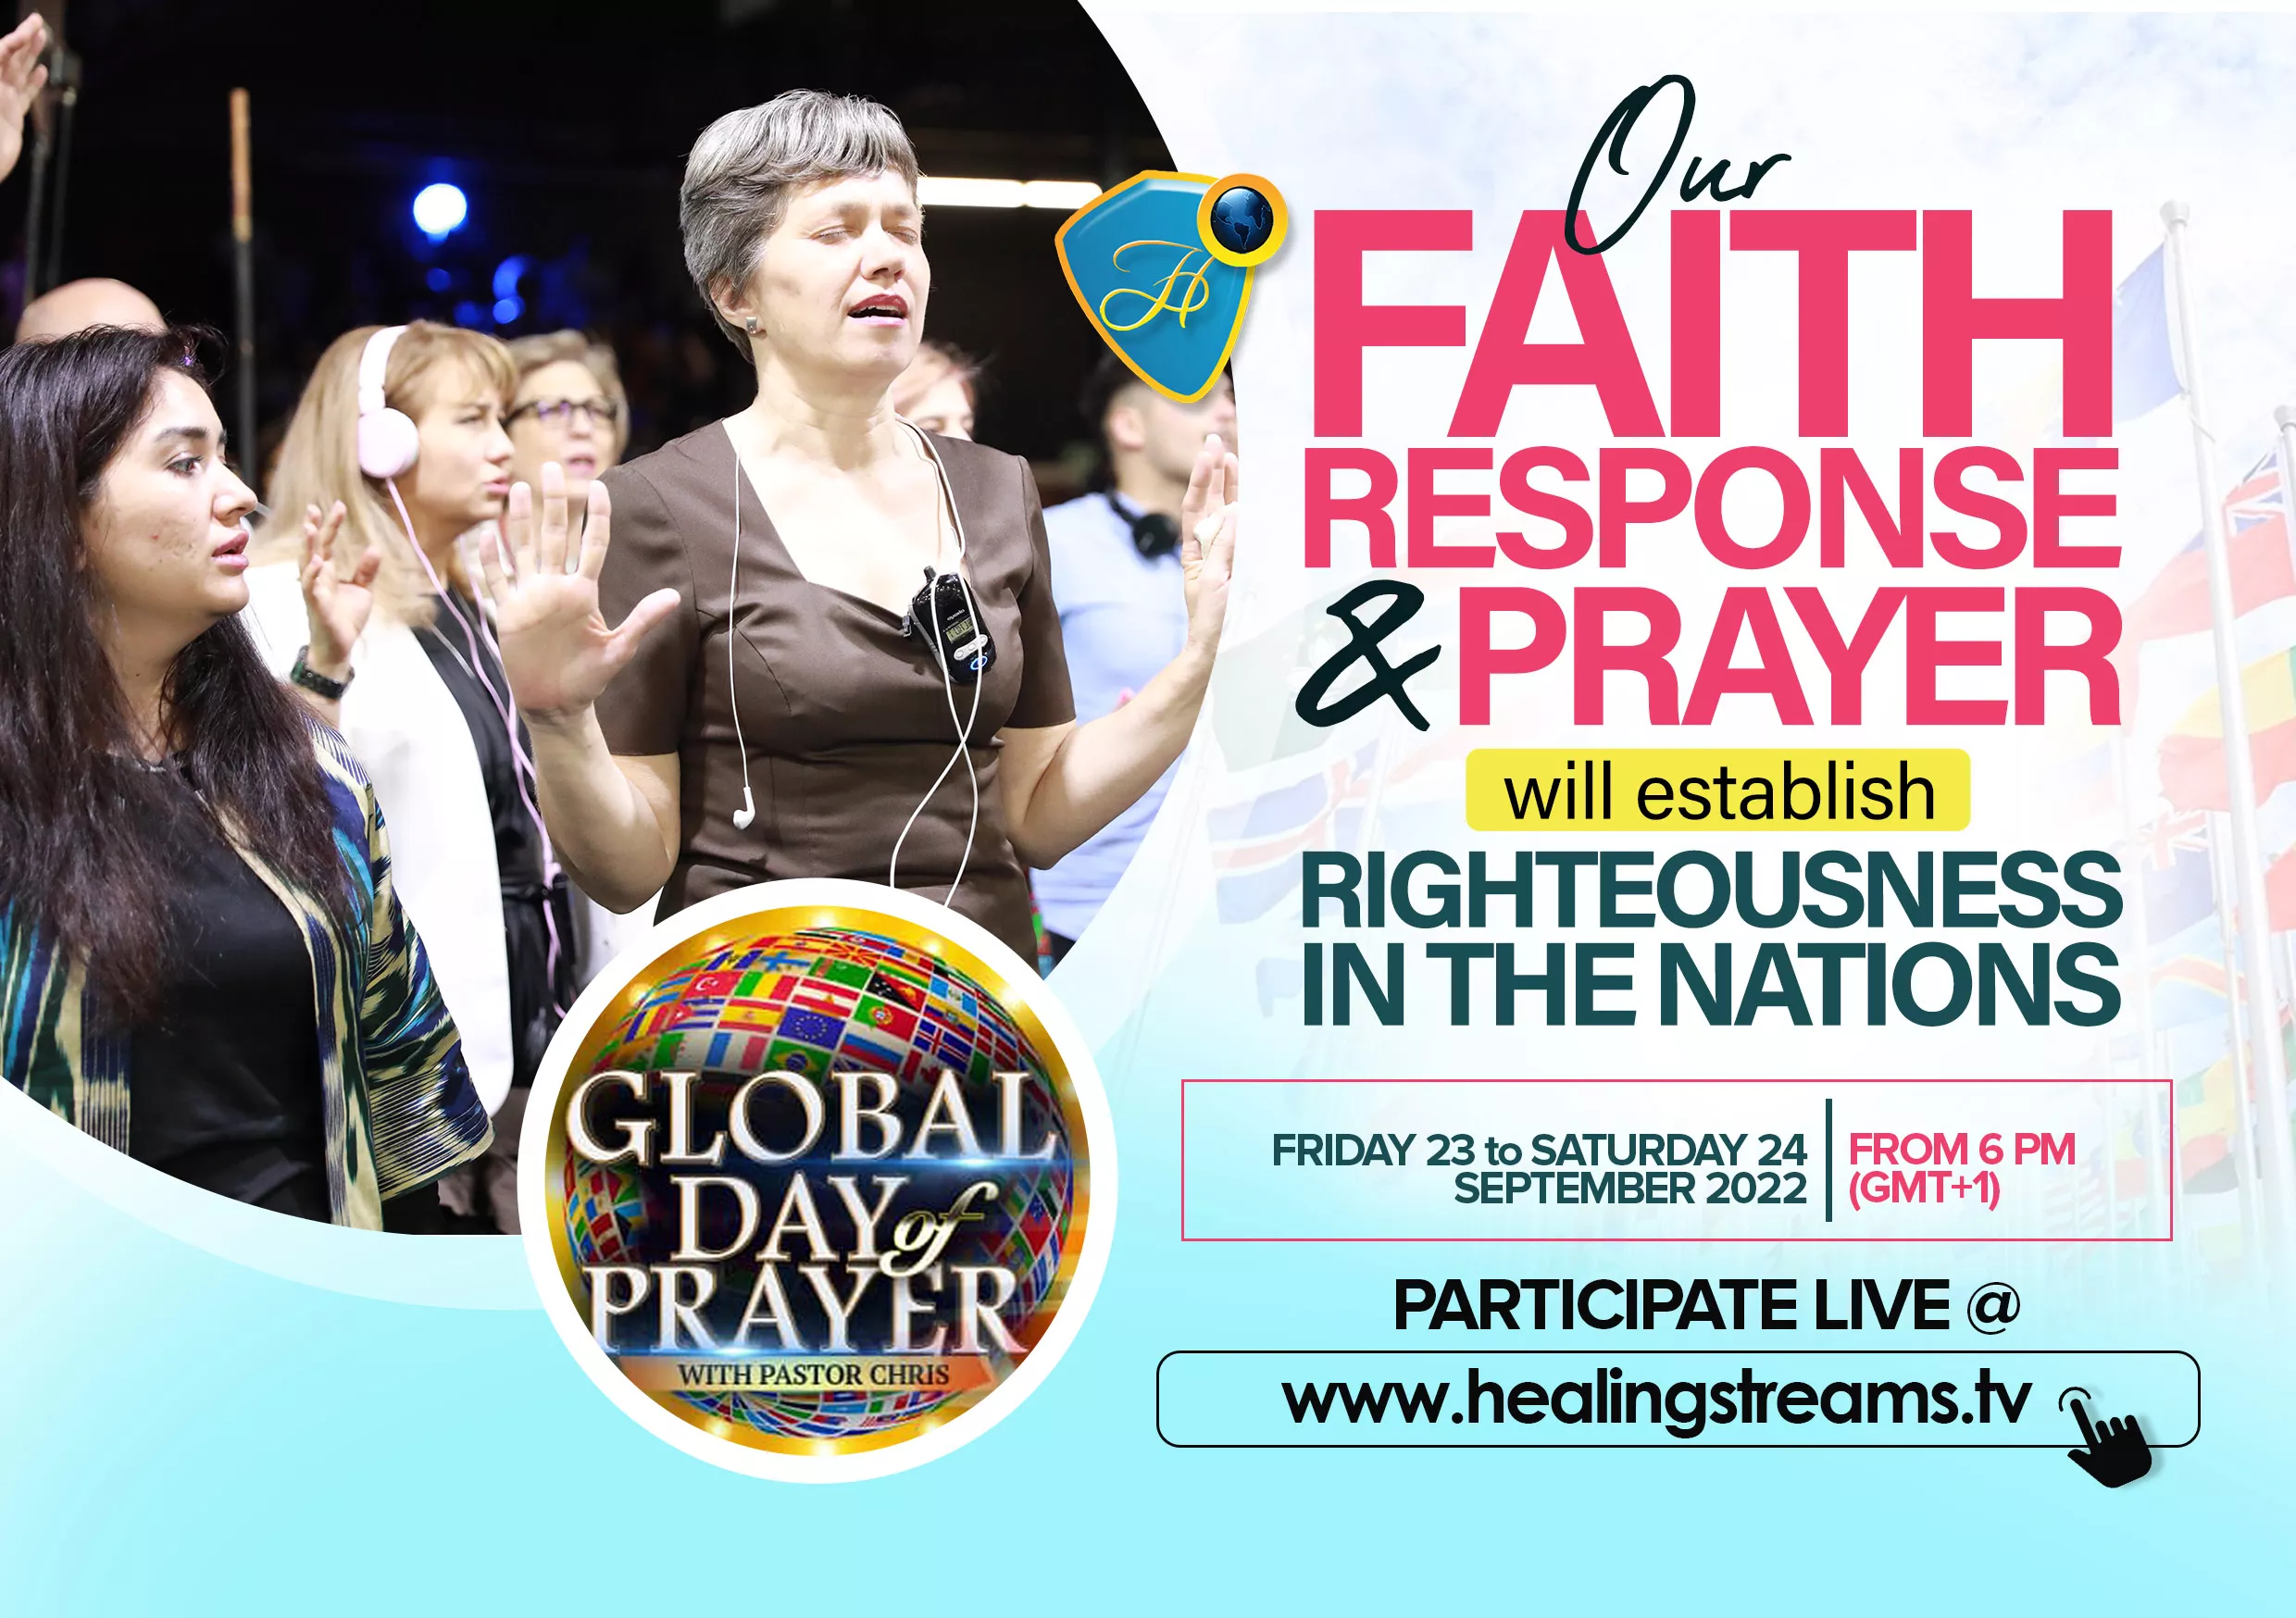 UPCOMING EVENT: SEPTEMBER GLOBAL DAY OF PRAYER WITH PASTOR CHRIS